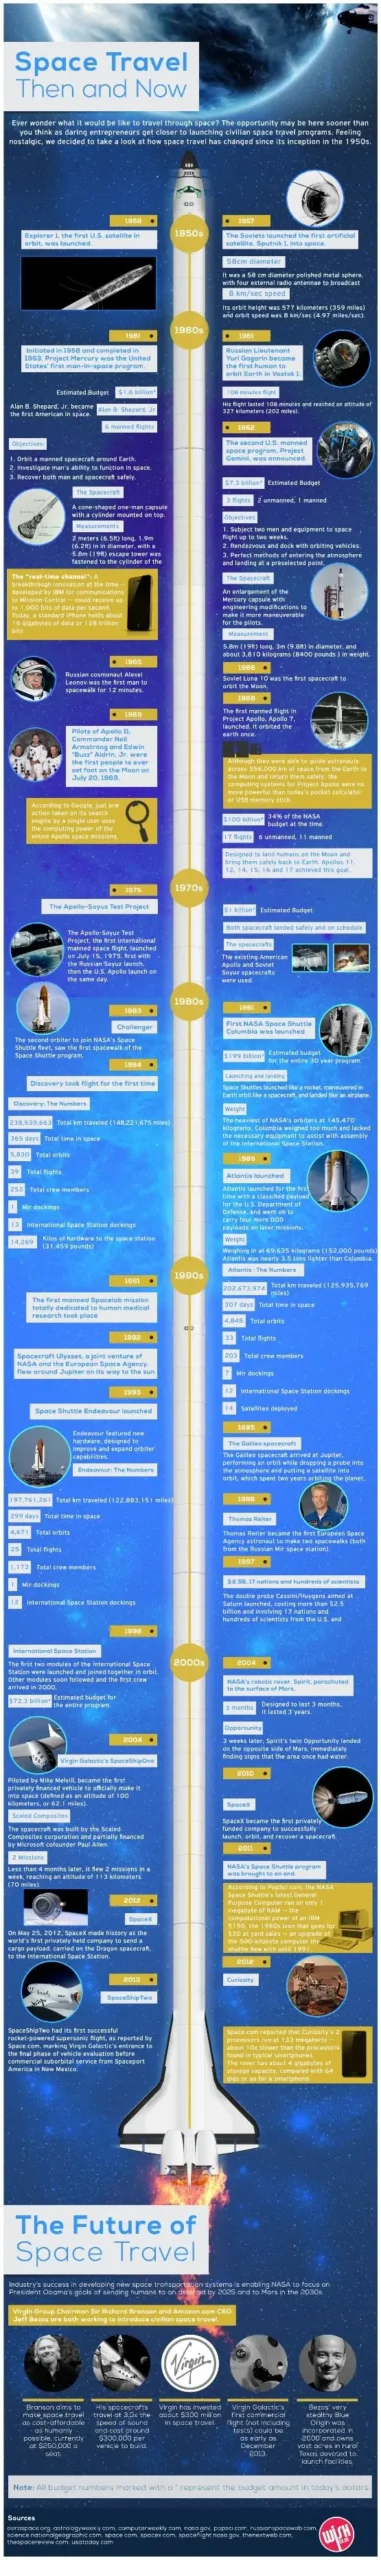 Space Travel Then And Now [InfoGraphic]
